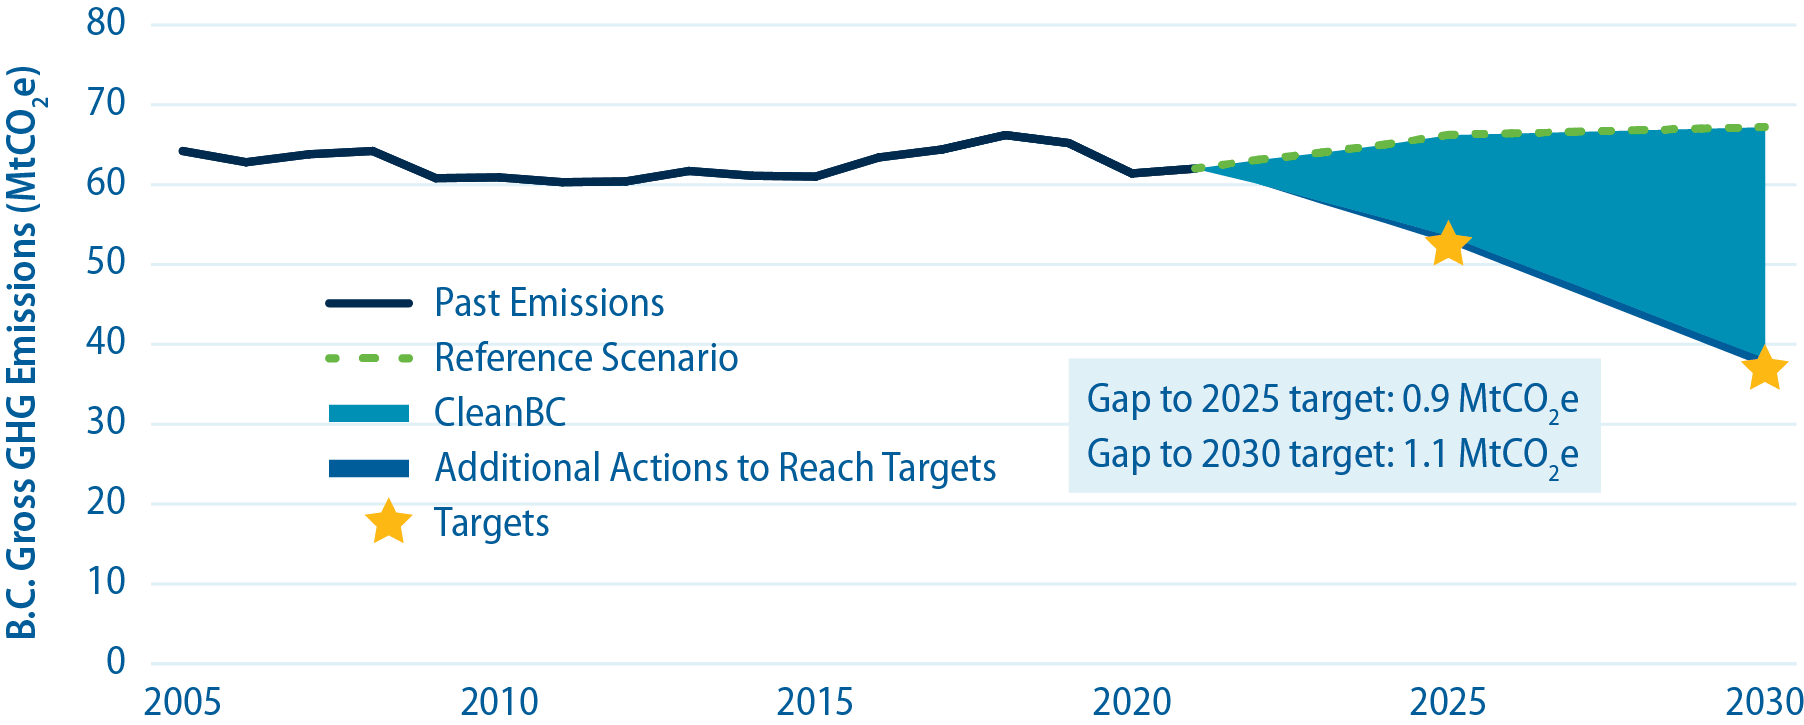 Graph showing BC will achieve 80% of the 2025 target,(a gap of 1.6 MtCO2e).